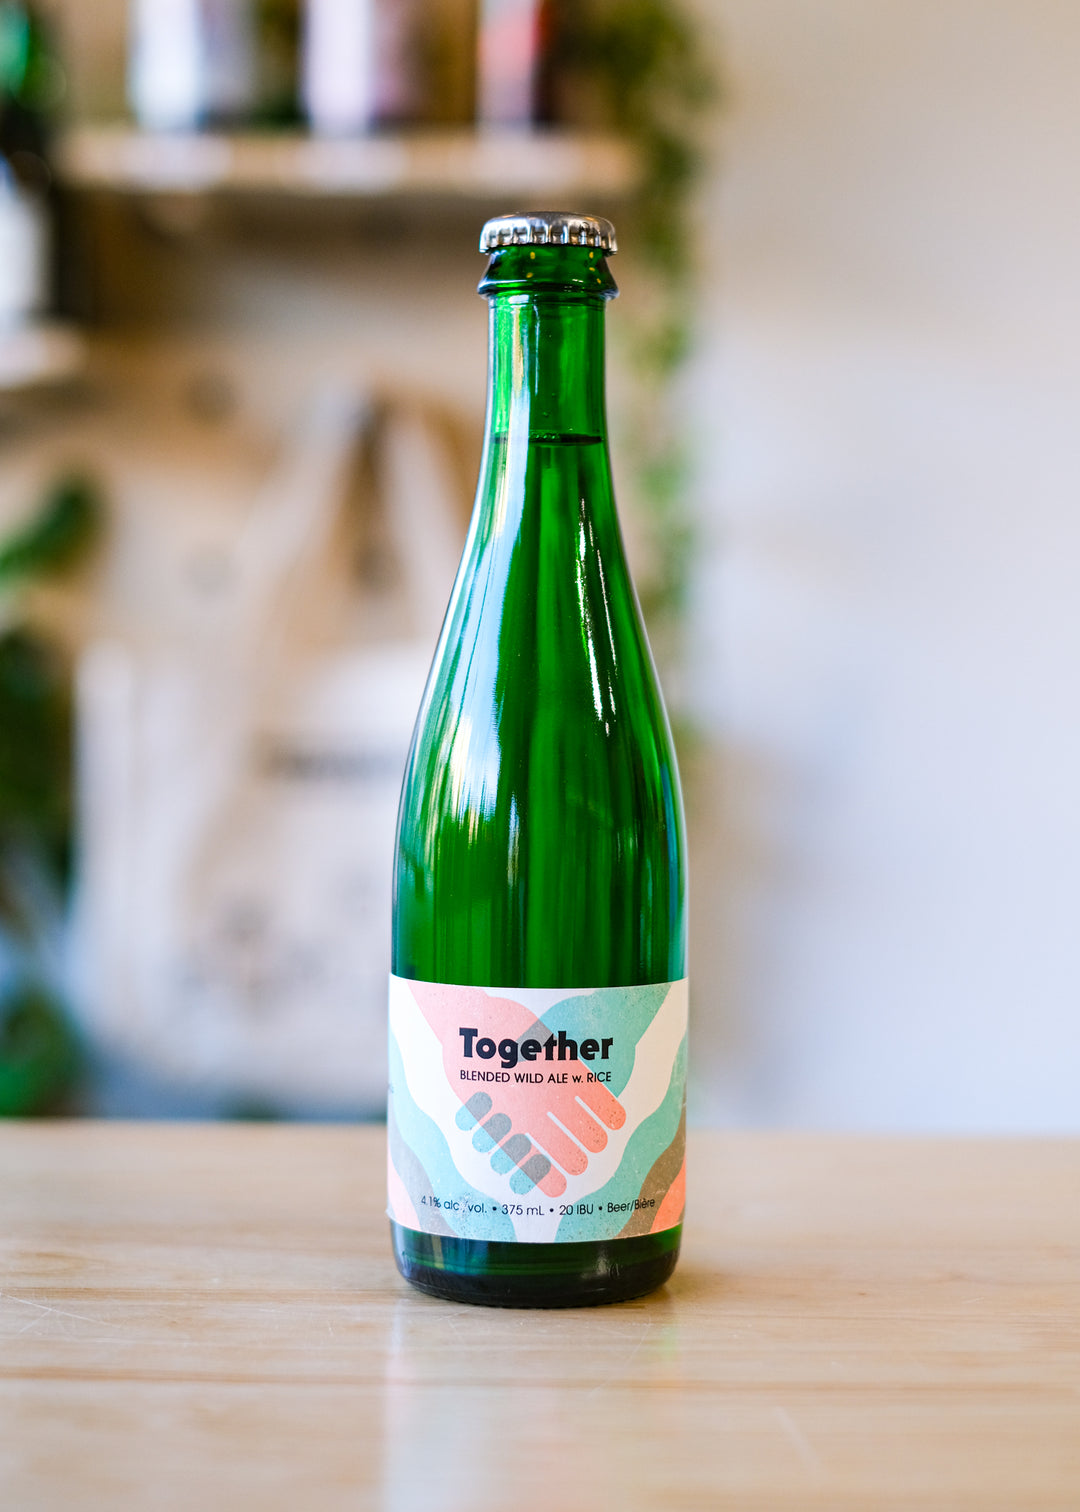 TOGETHER | Blended Wild Ale w/ Rice(Collab w/ Lone Oak Brewing)